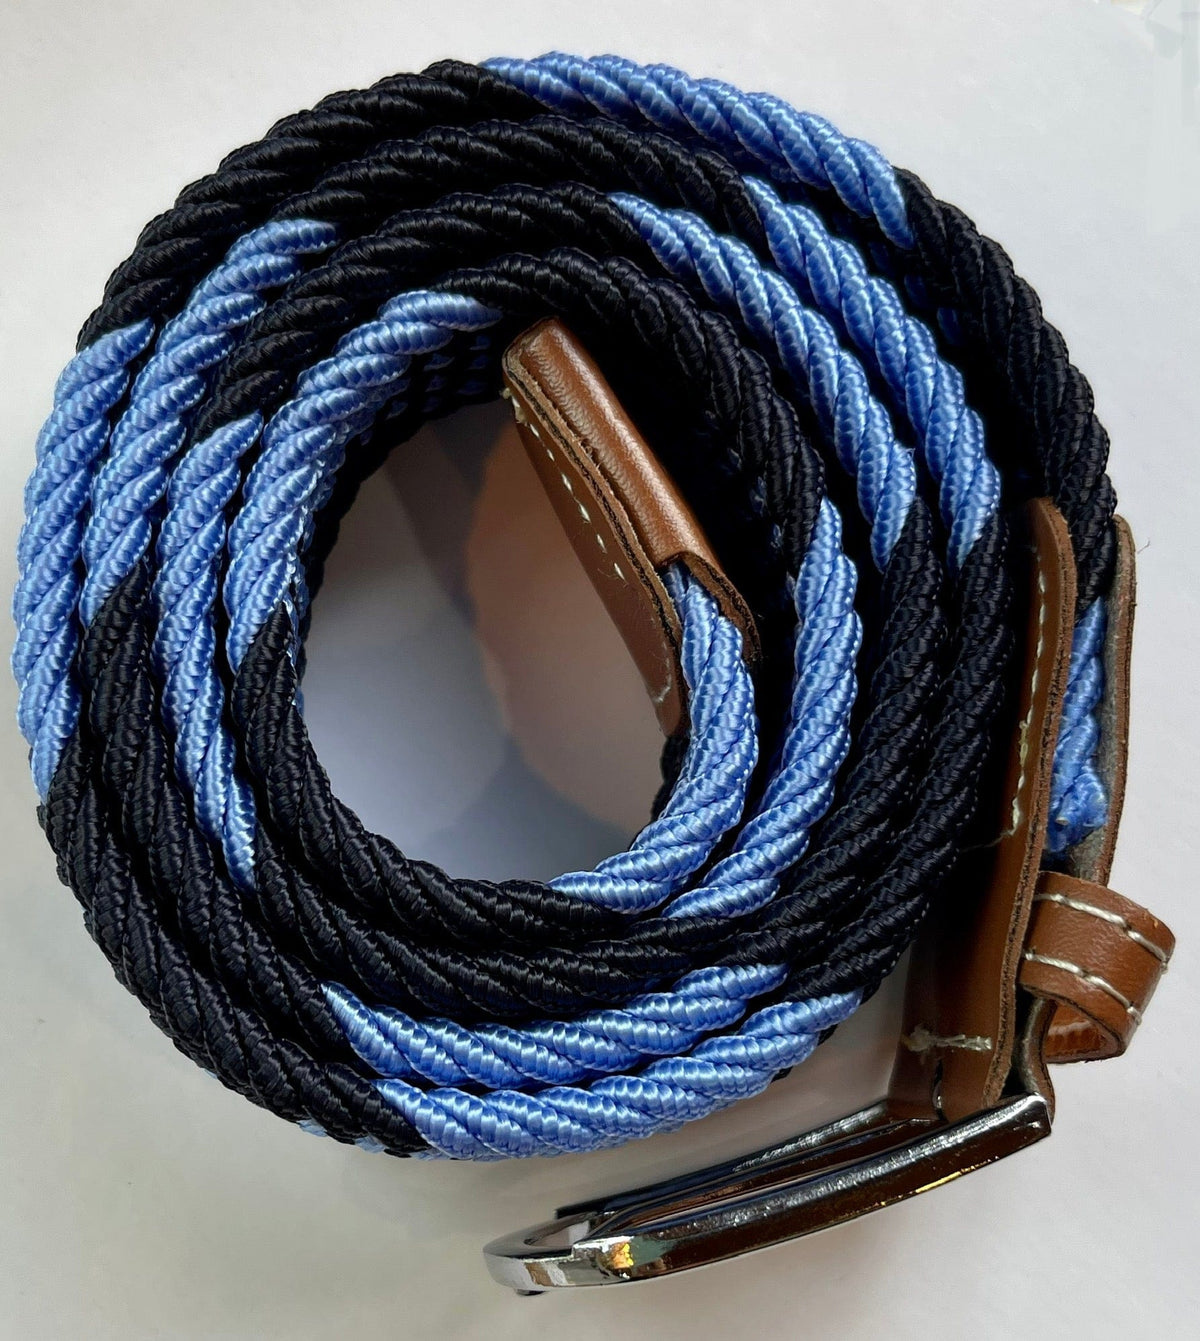 Rather Lucky Belts Navy/Carolina Blue Rather Lucky- Braided Belt equestrian team apparel online tack store mobile tack store custom farm apparel custom show stable clothing equestrian lifestyle horse show clothing riding clothes horses equestrian tack store